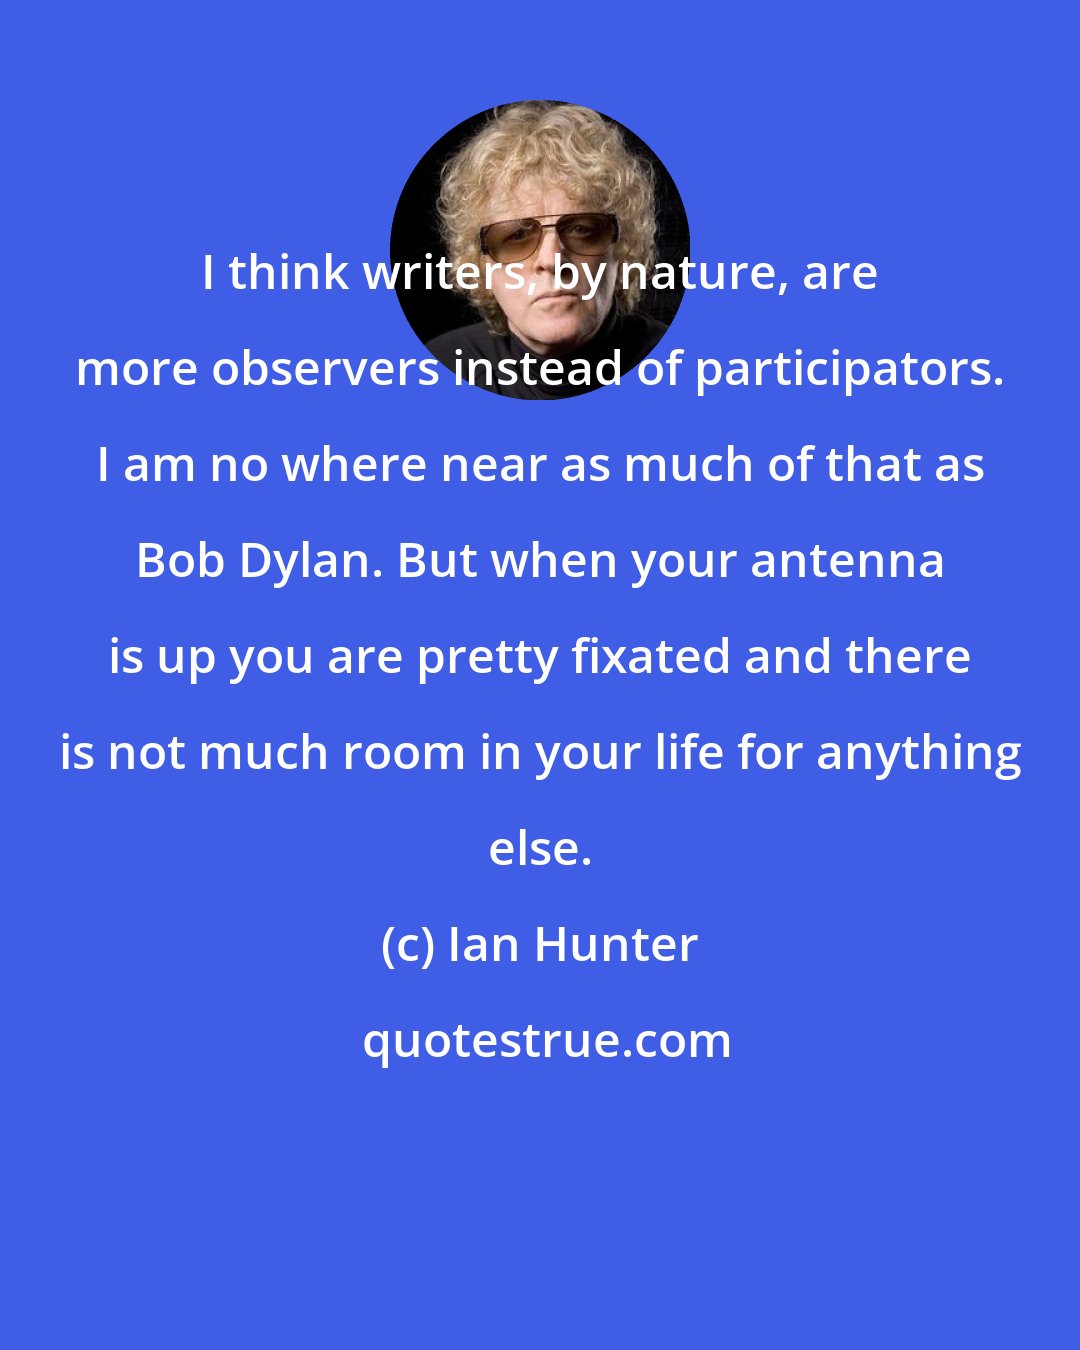 Ian Hunter: I think writers, by nature, are more observers instead of participators. I am no where near as much of that as Bob Dylan. But when your antenna is up you are pretty fixated and there is not much room in your life for anything else.